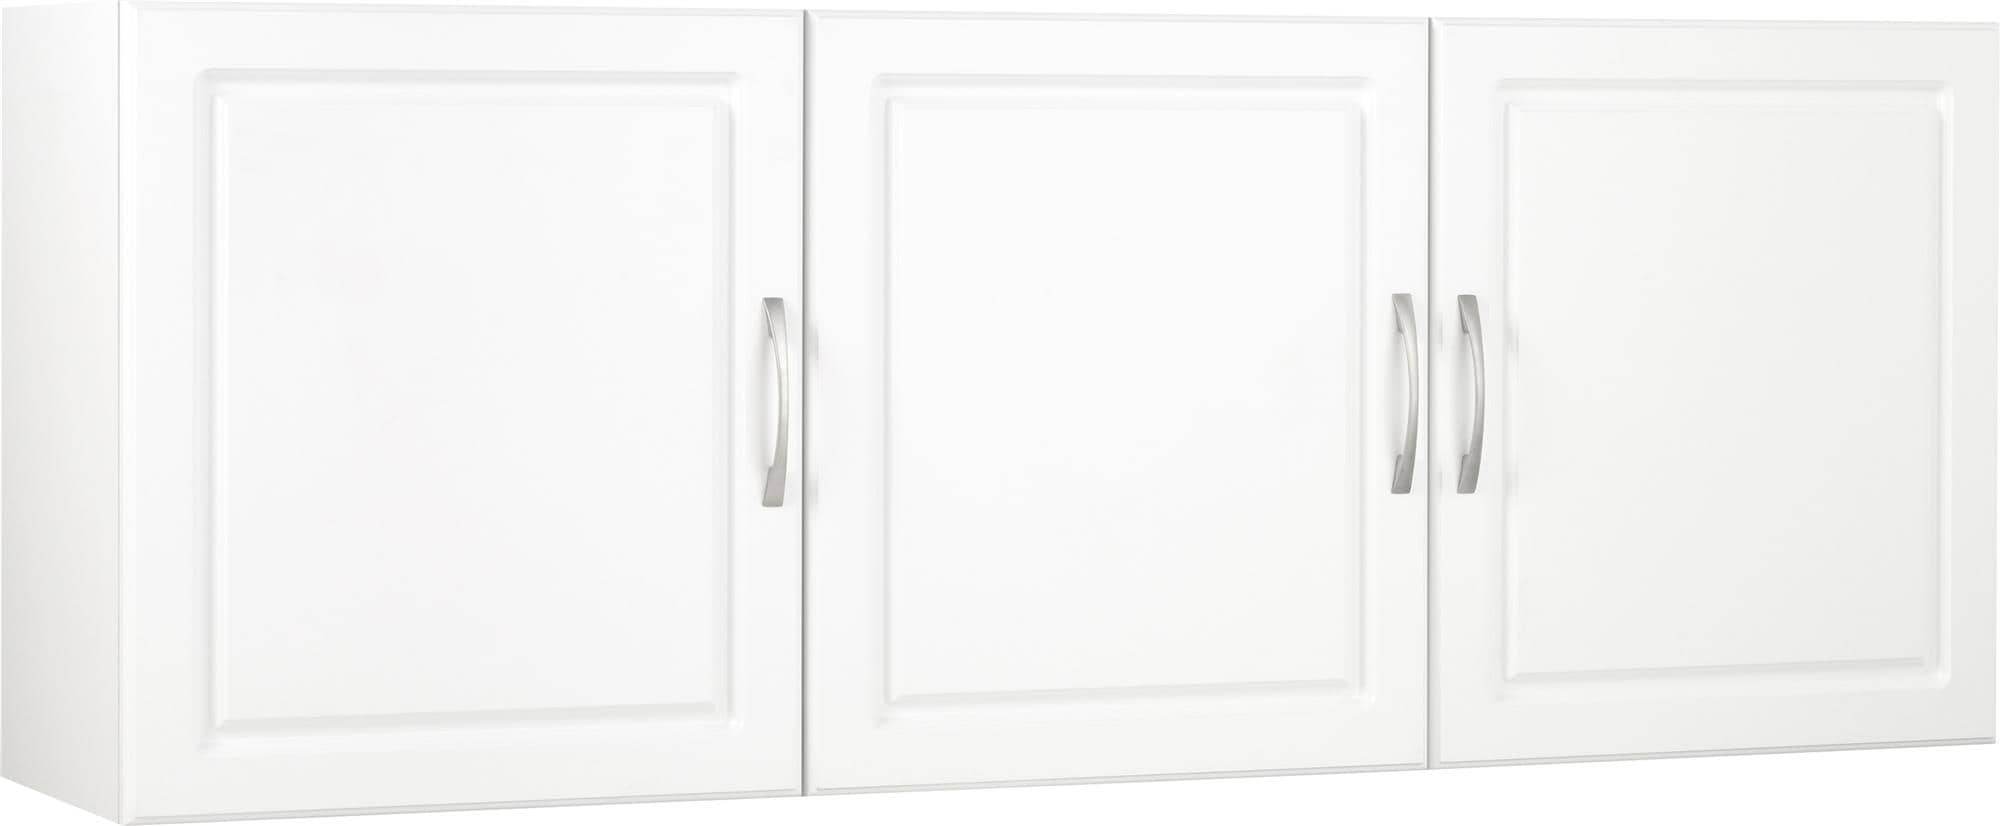 Wall-mounted Garage Cabinets at Lowes.com